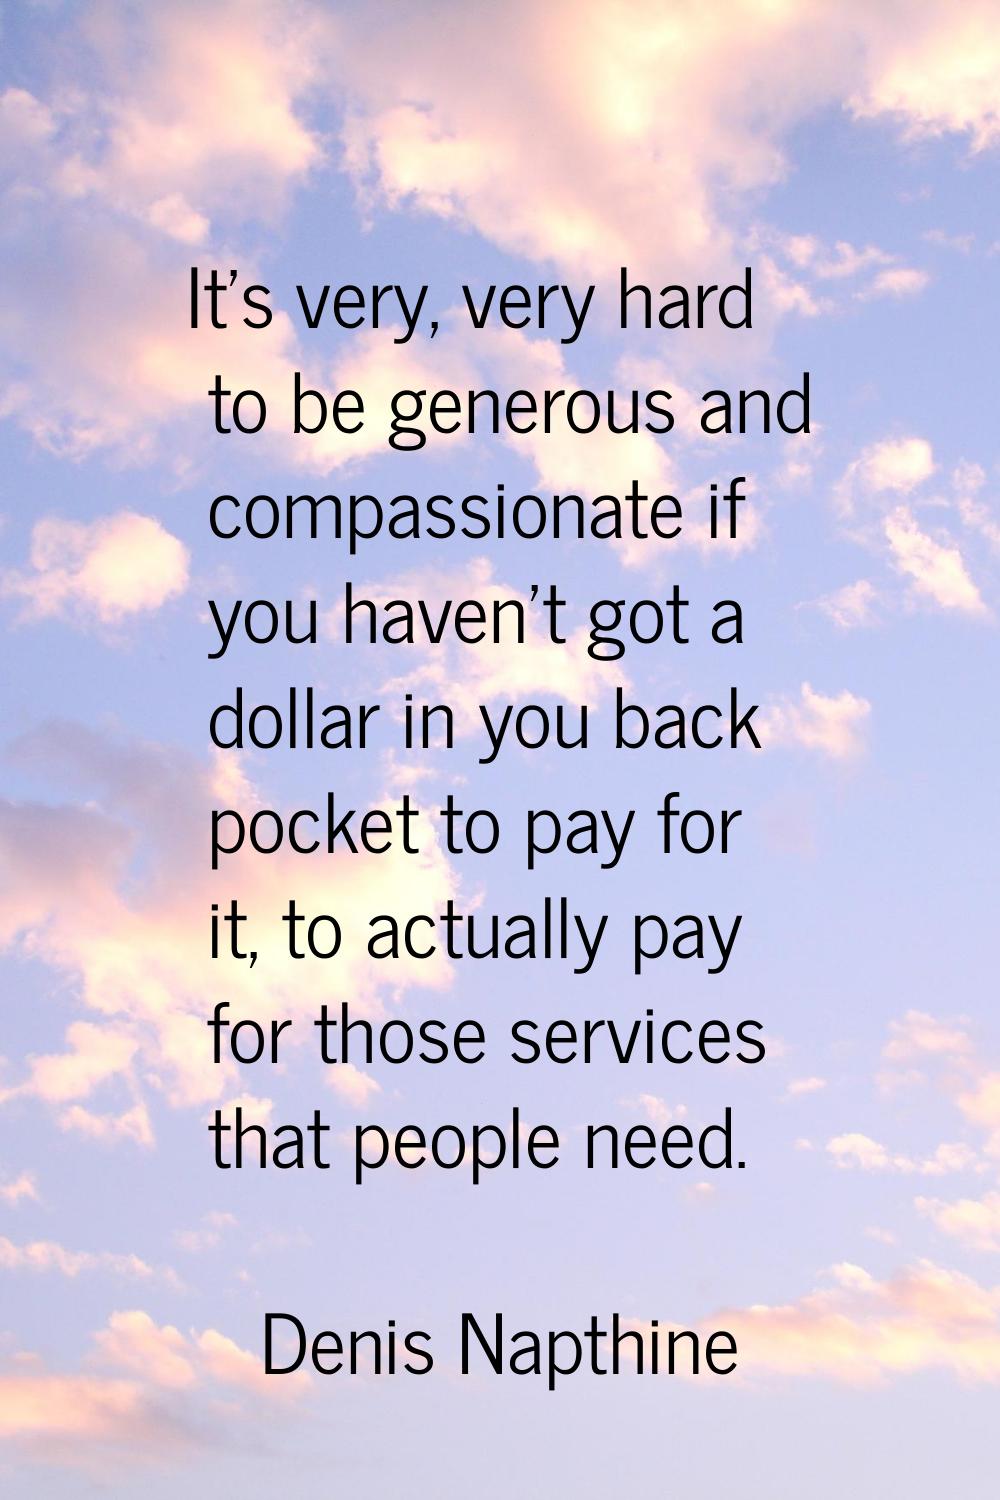 It's very, very hard to be generous and compassionate if you haven't got a dollar in you back pocke